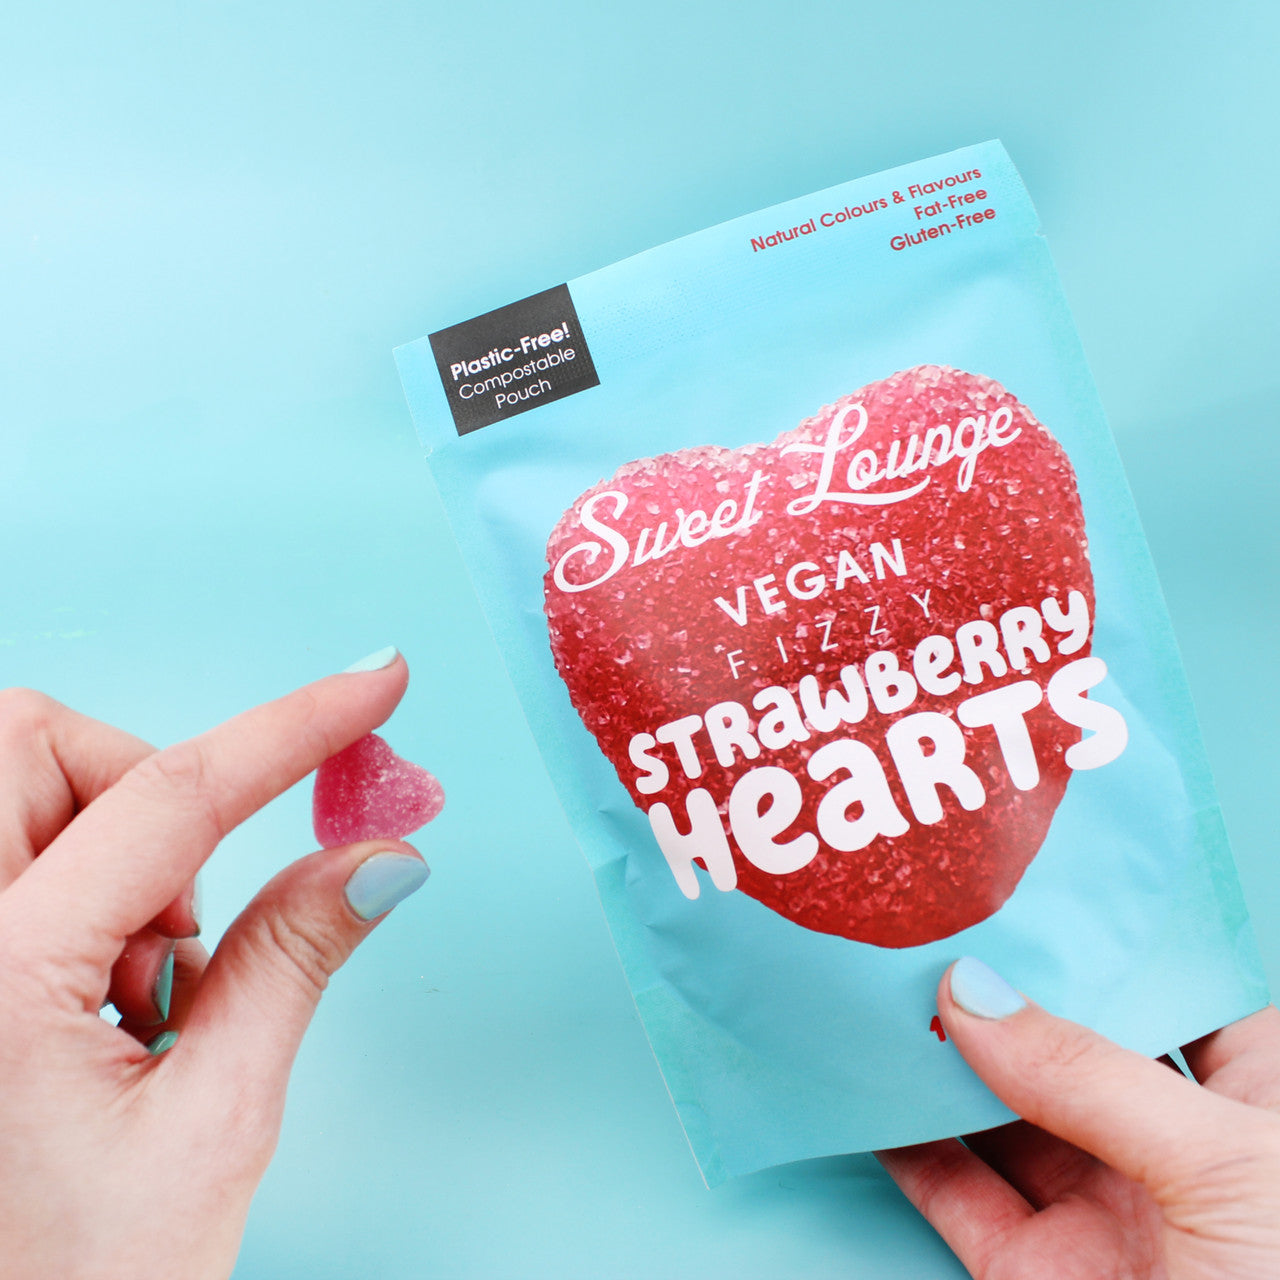 Vegan, Plastic Free Heart Shaped Sweets. Compostable Packaging, Delicious Natural Flavours, Fat Free, Gluten Free. Buy at Out of the Box Gifts